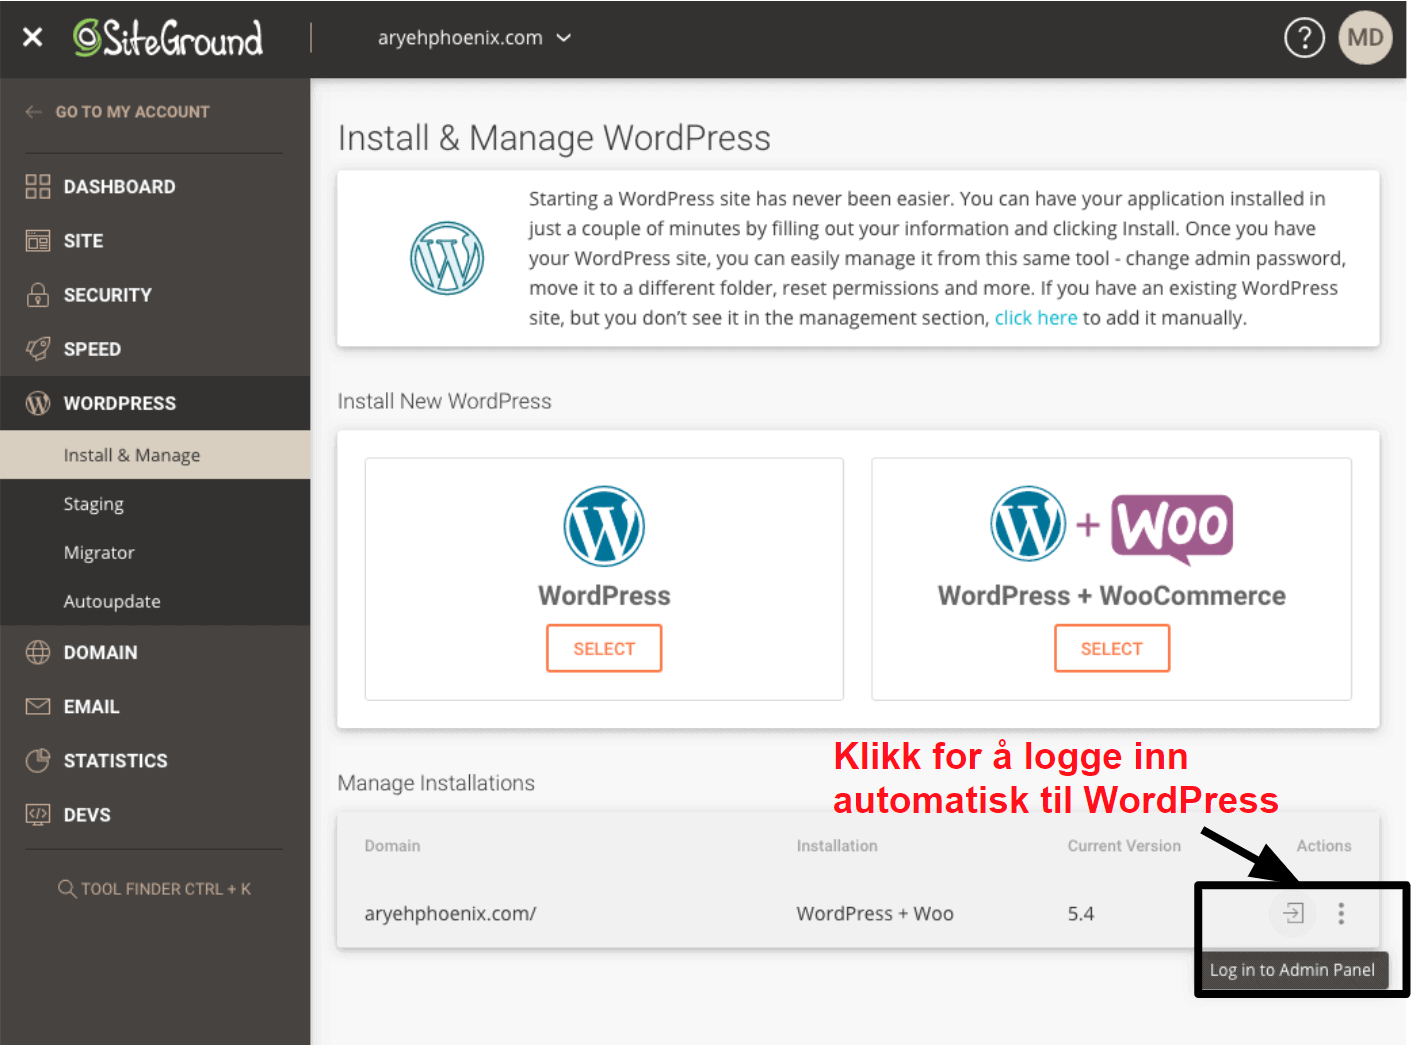 SiteGround offers a one click login option for your WordPress dashboard NB15